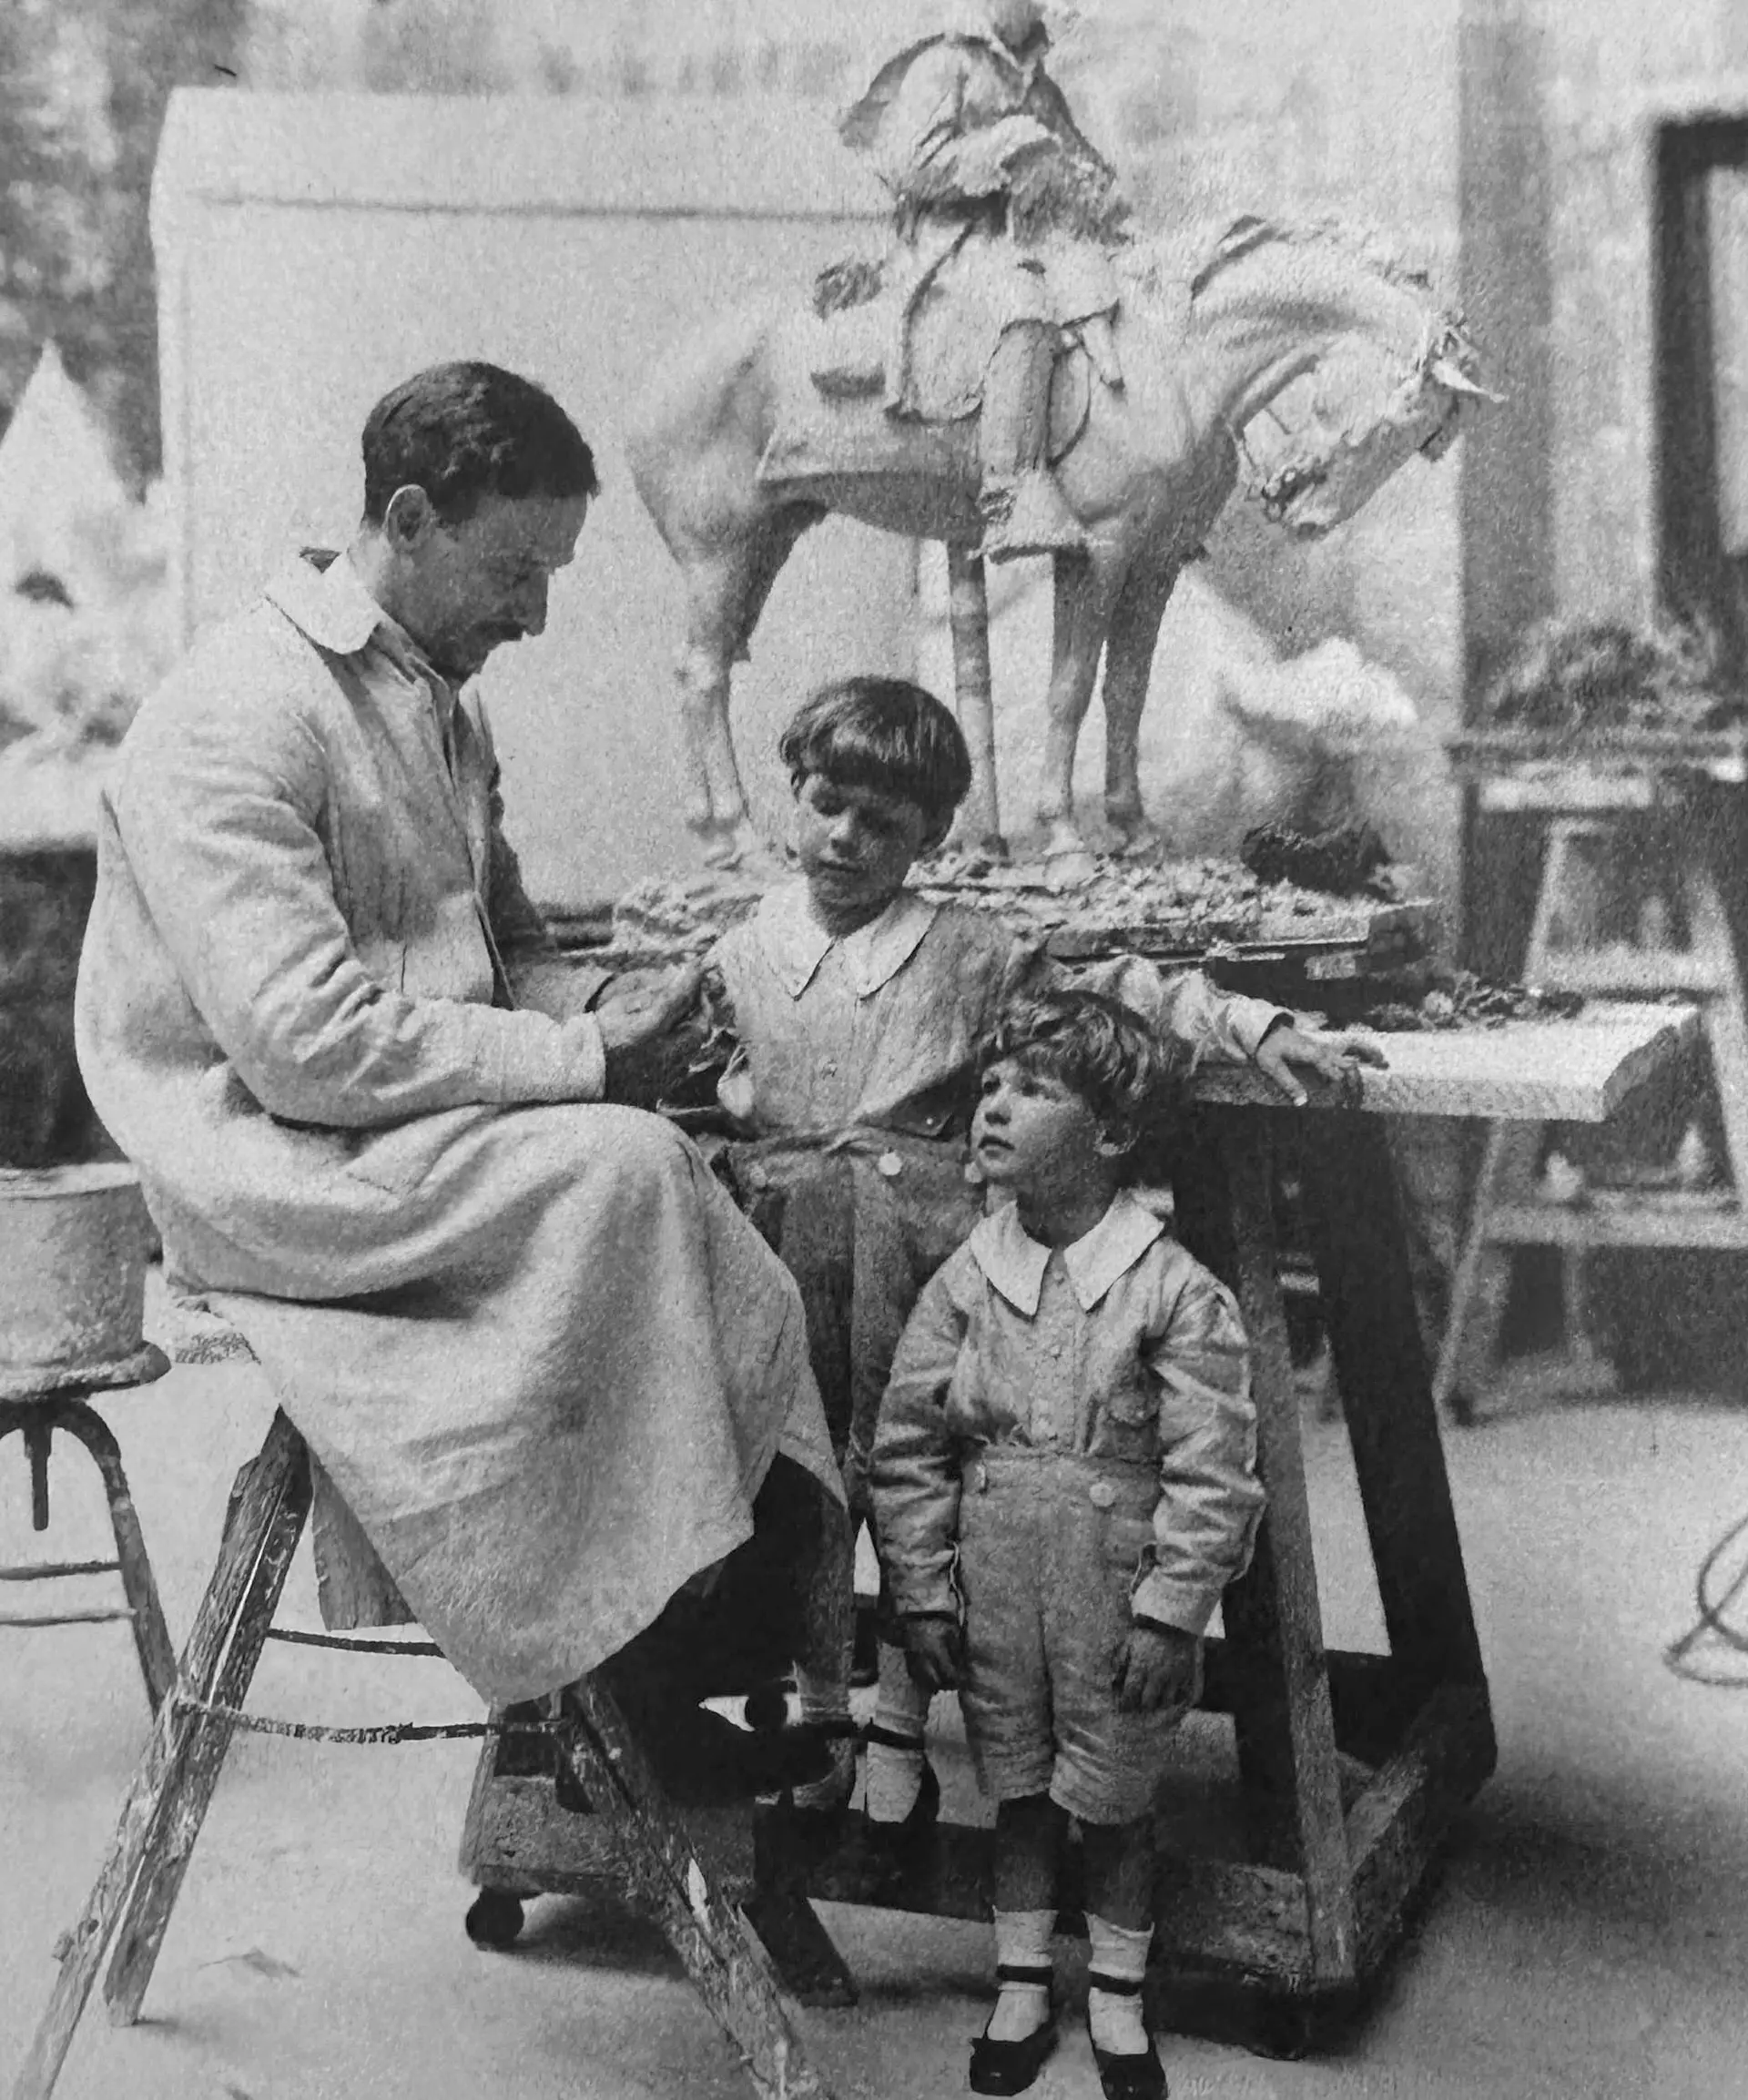 A black and white photograph shows a man in a white work coat sitting on a stepladder and looking down to his two sons beside him. Behind these figures, is a sculpture of a man on a horse standing on a workbench.